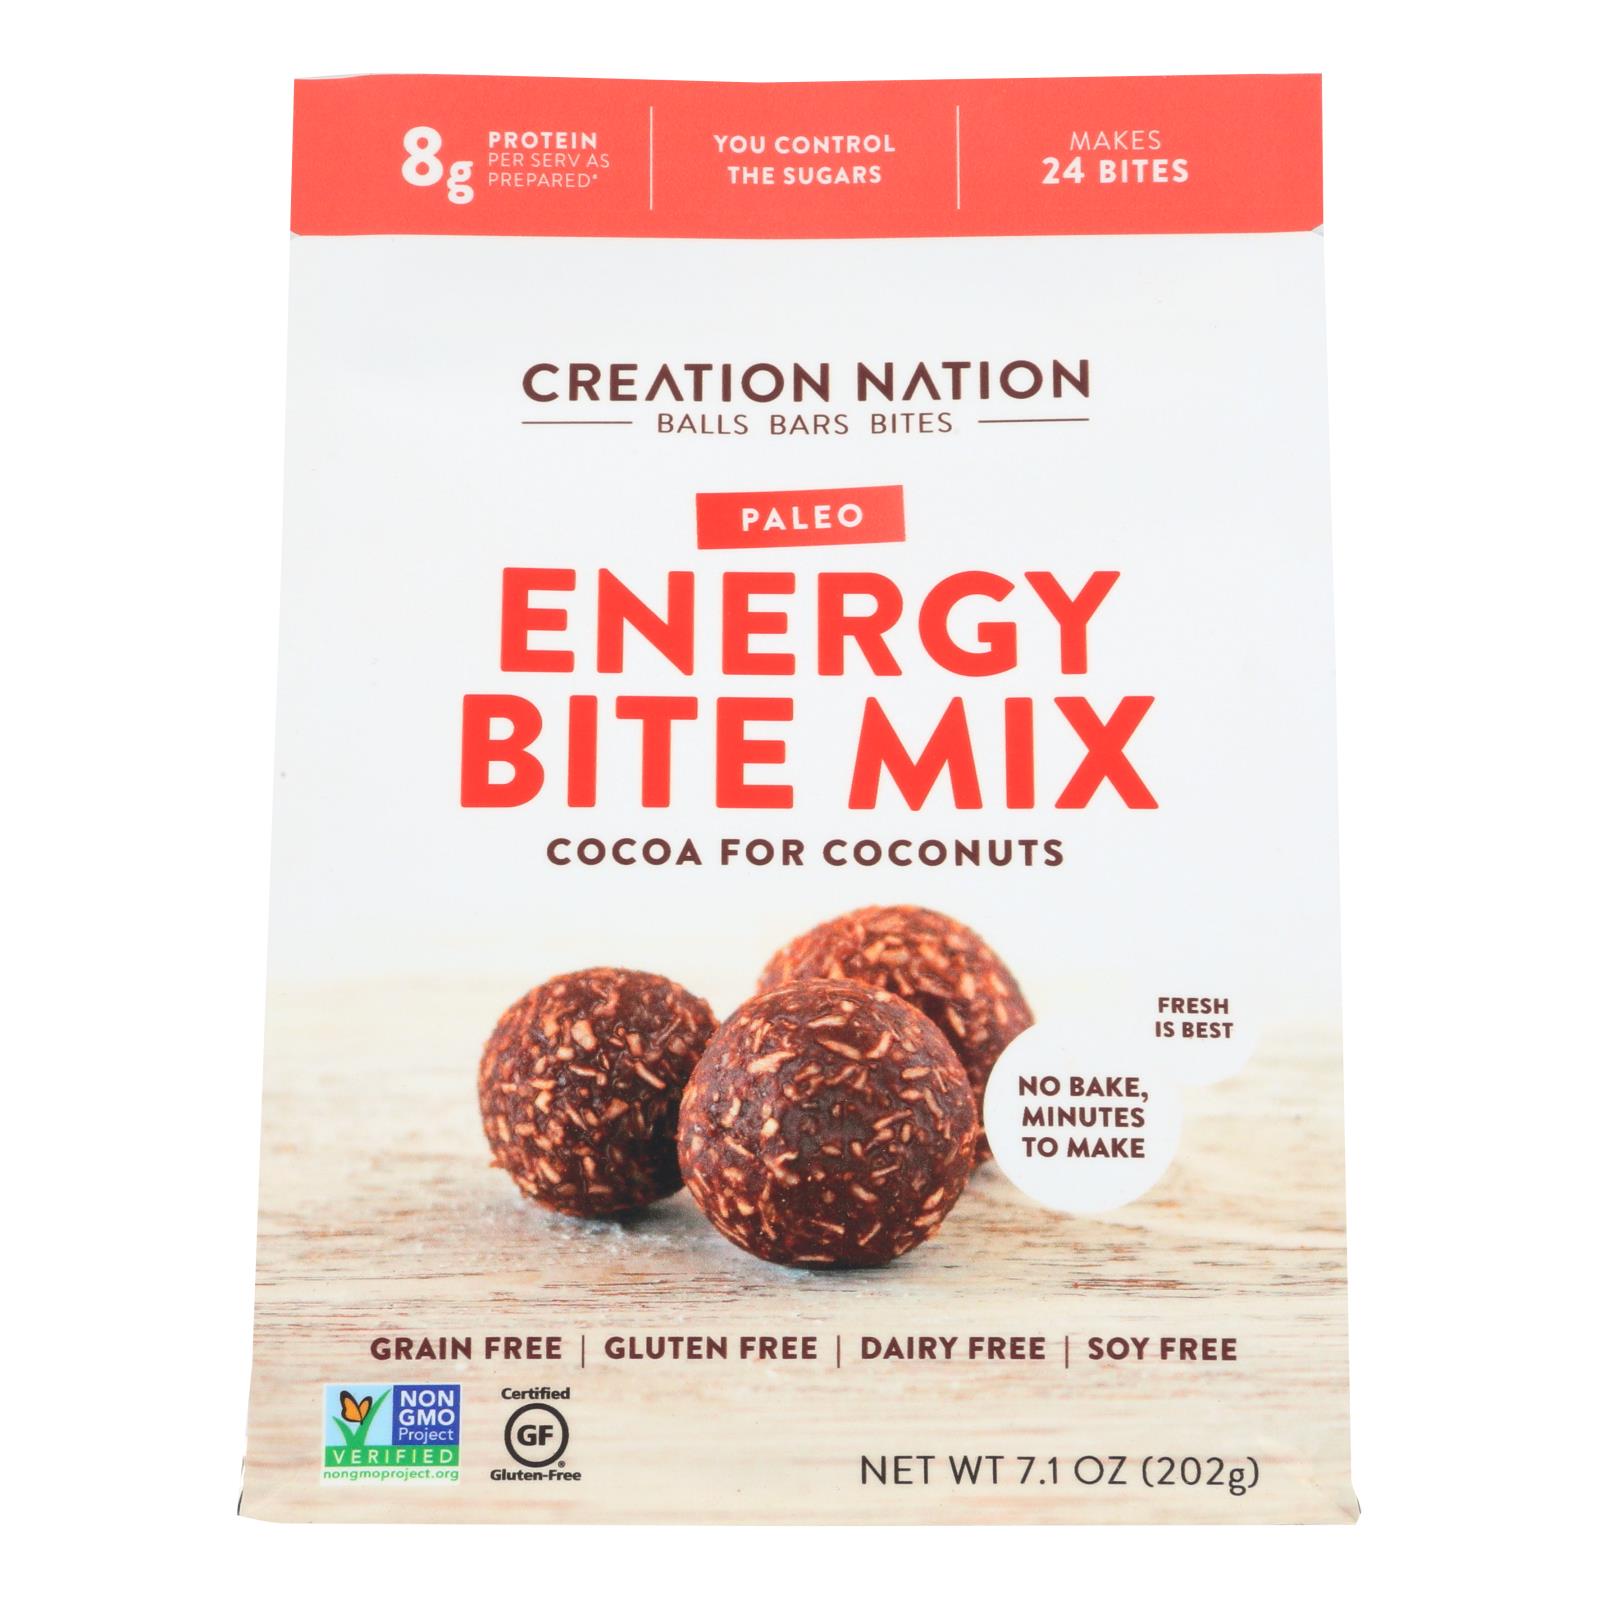 Creation Nation Cocoa For Coconuts Paleo Energy Bite Mix - 6개 묶음상품 - 7.1 OZ